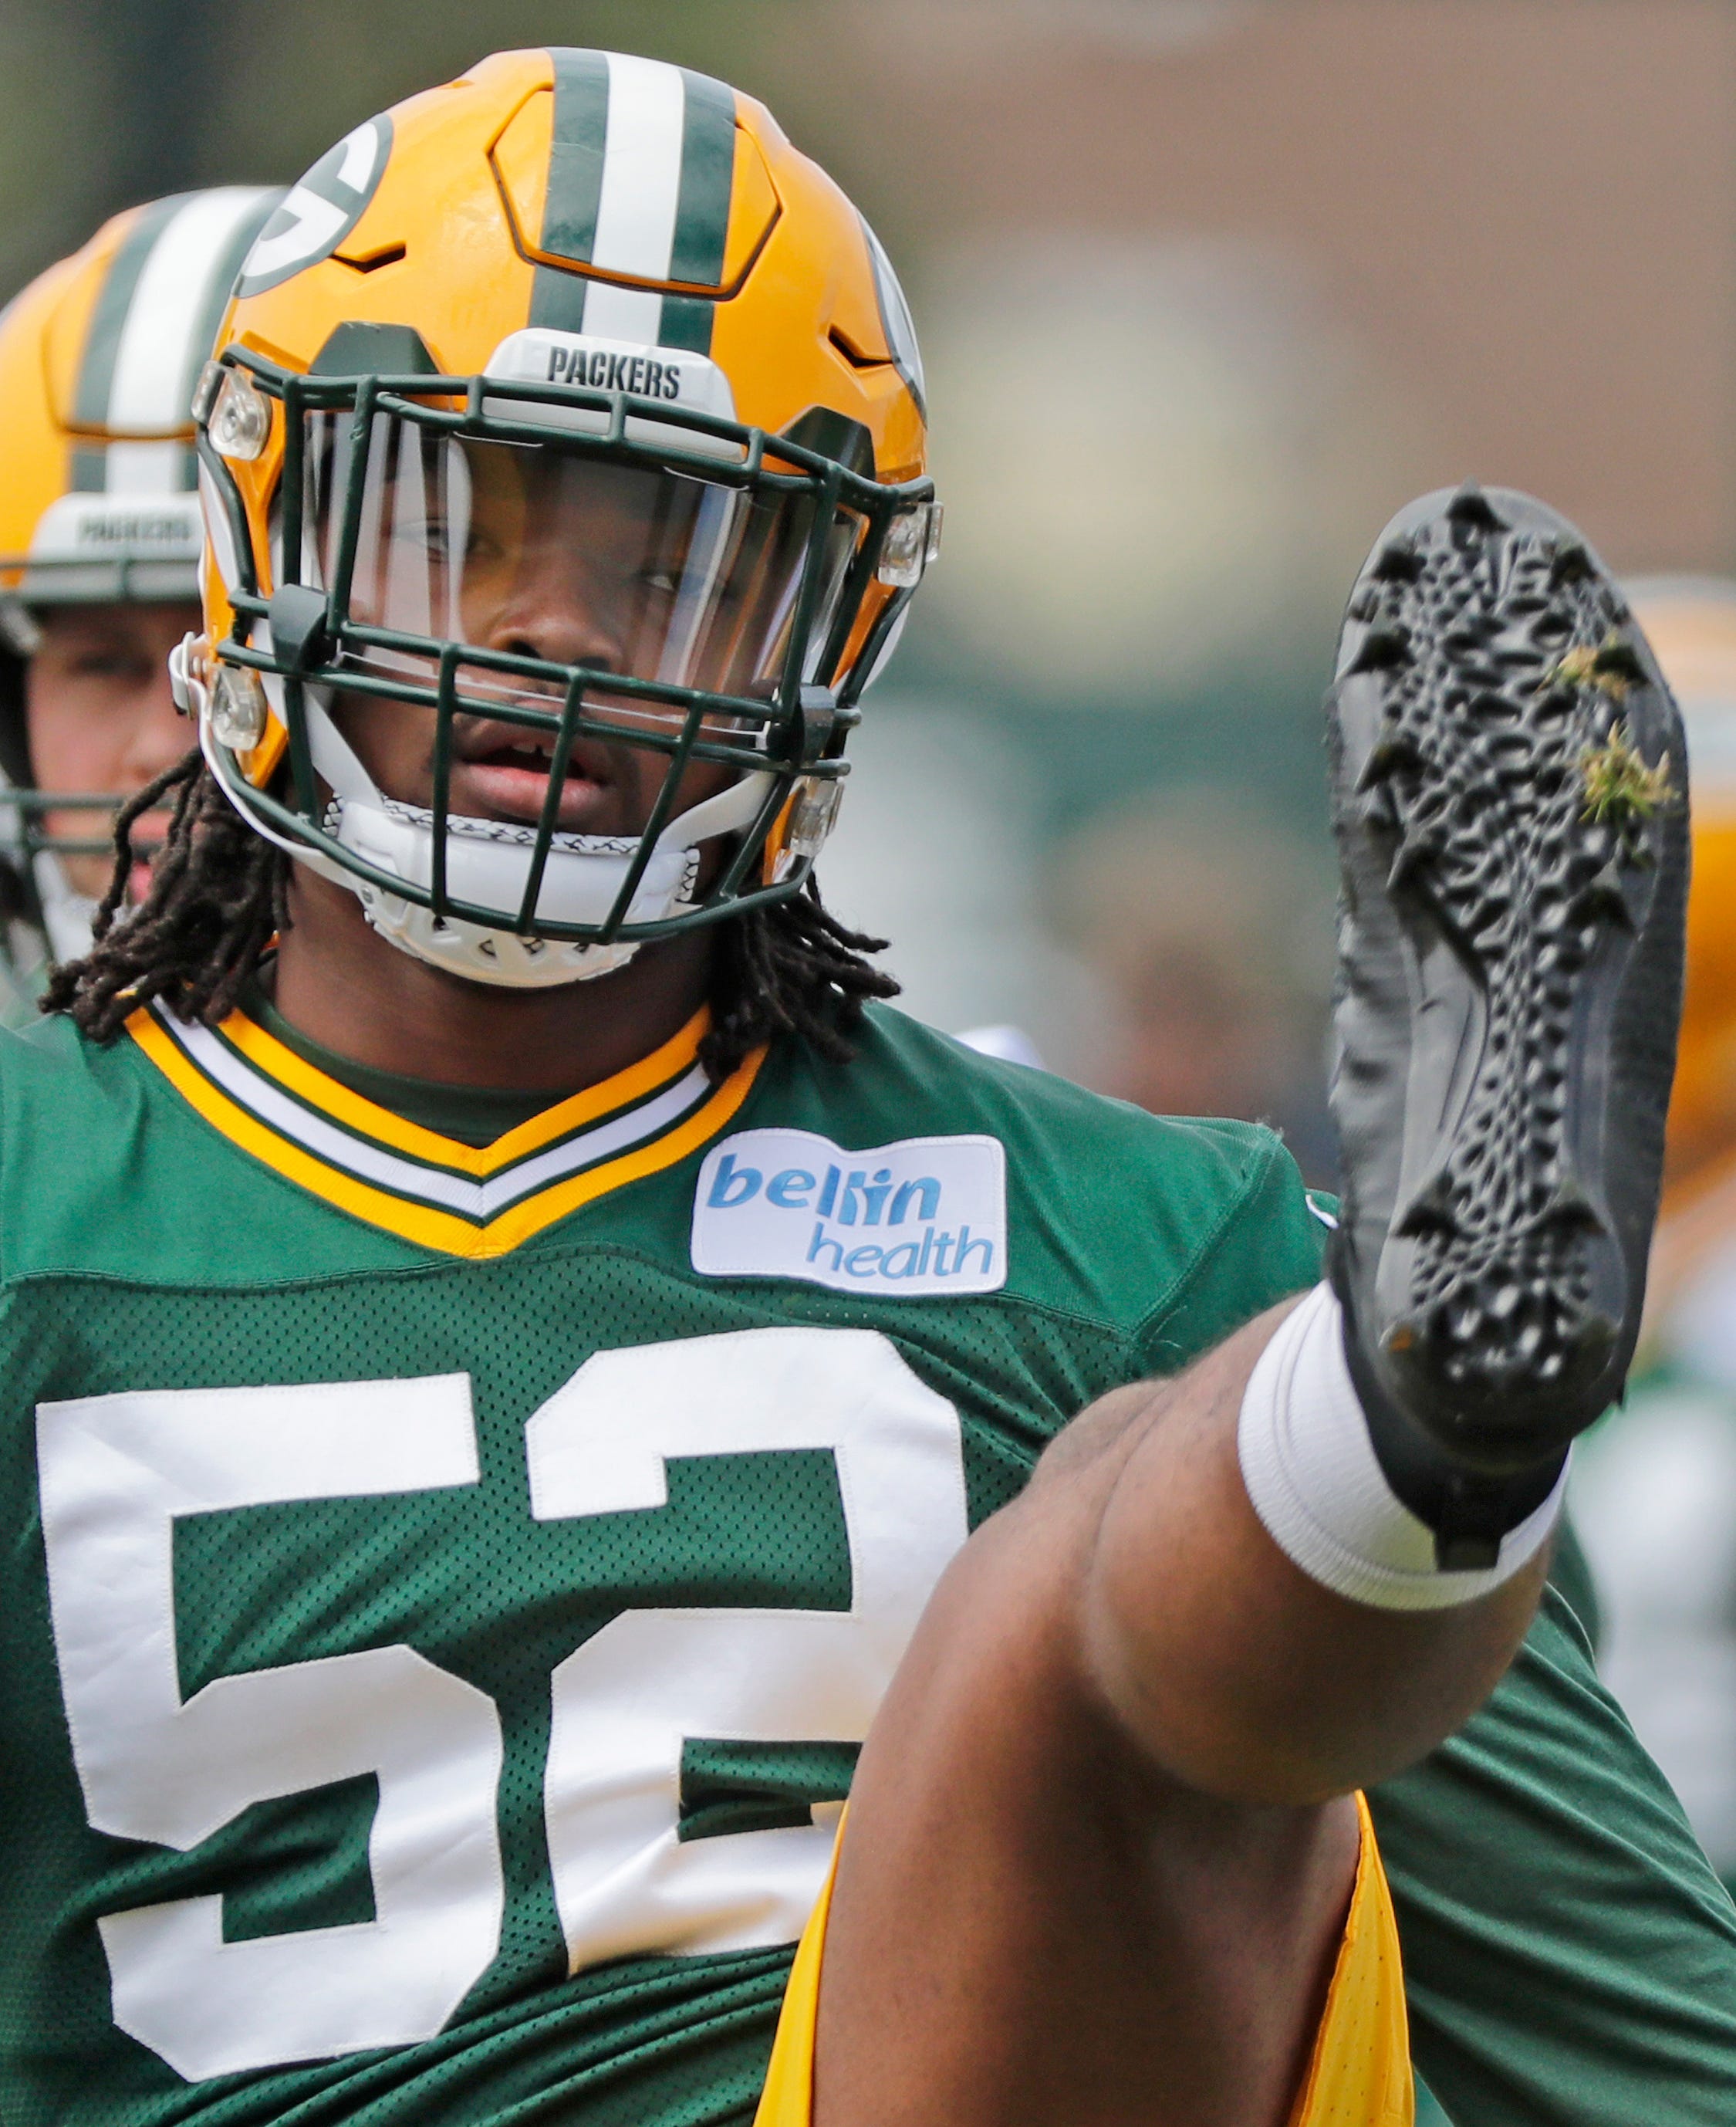 Green Bay Packers linebacker Rashan Gary (52) during practice at Clarke Hinkle Field on Tuesday, May 21, 2019 in Ashwaubenon, Wis.
Adam Wesley/USA TODAY NETWORK-Wis